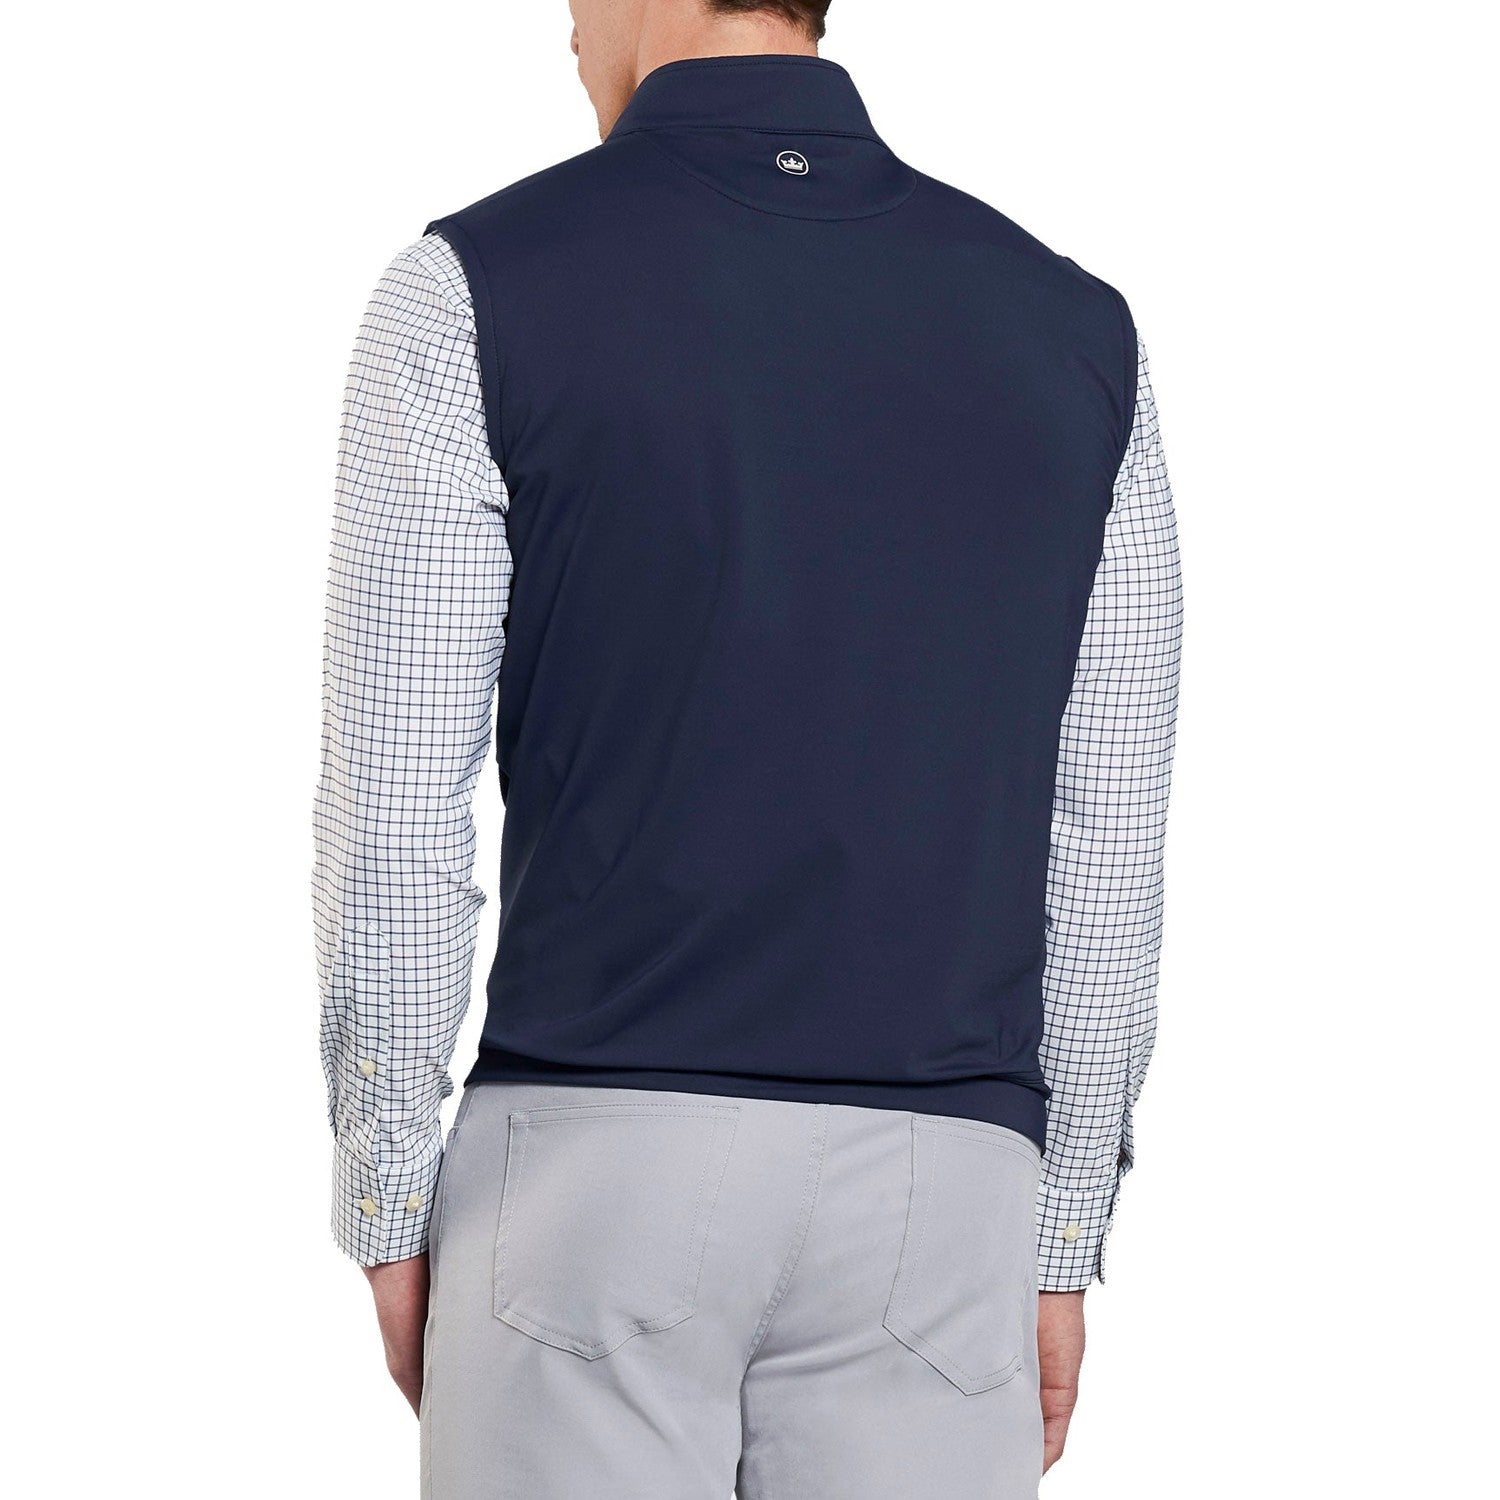 Peter Millar x Barstool Golf Terry Quarter-Zip Vest-Vests-Fore Play-Barstool Sports